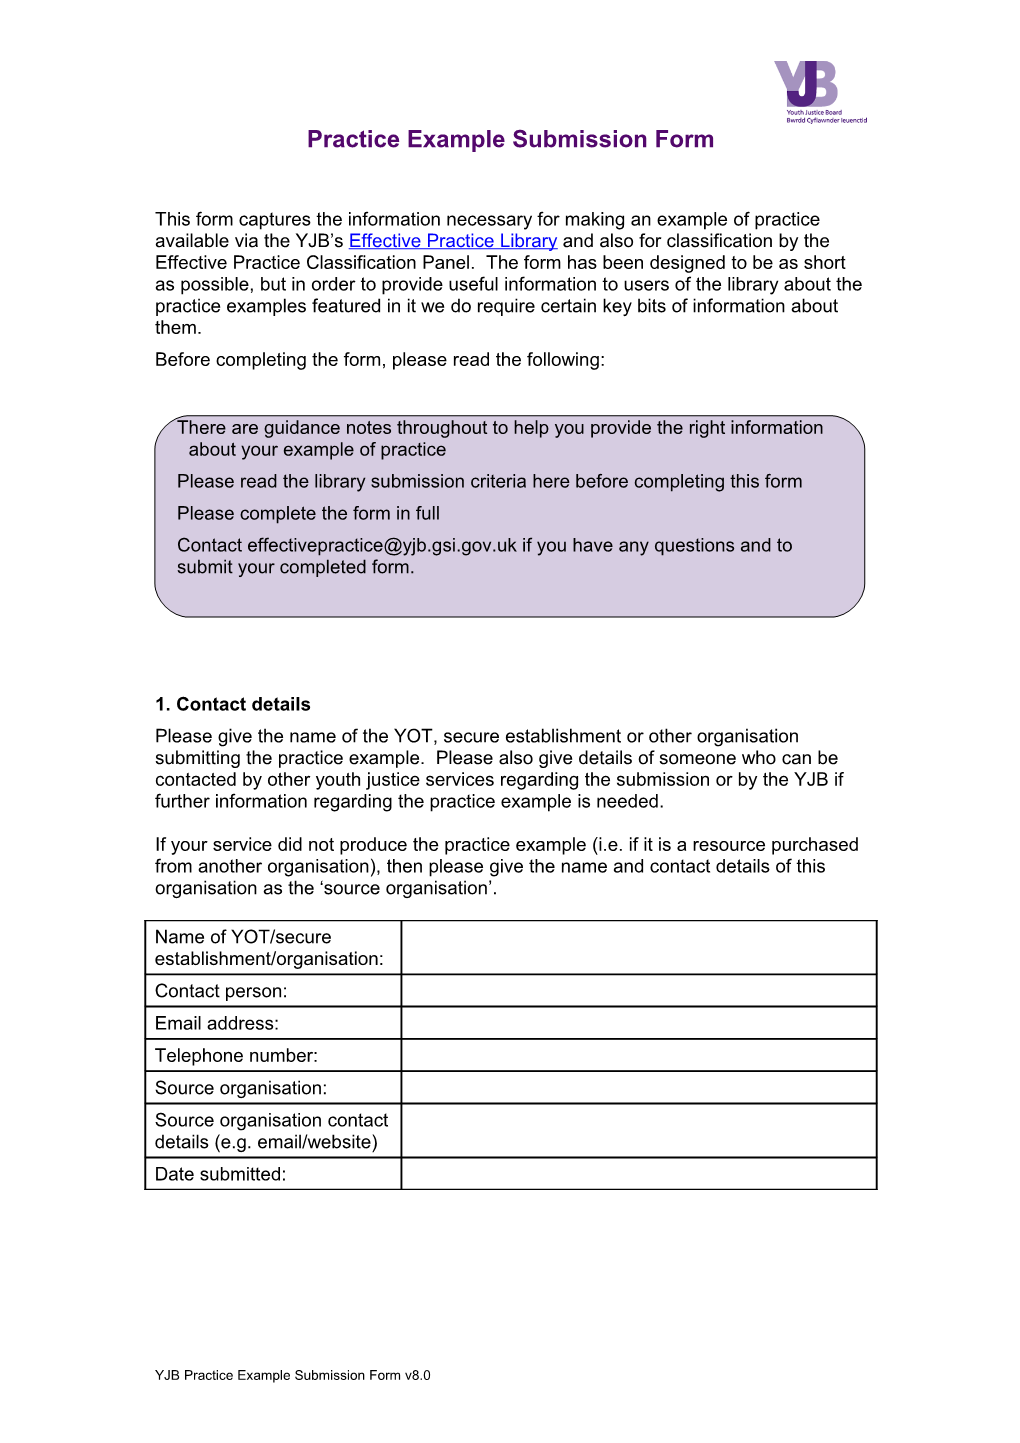 Practice Example Submission Form